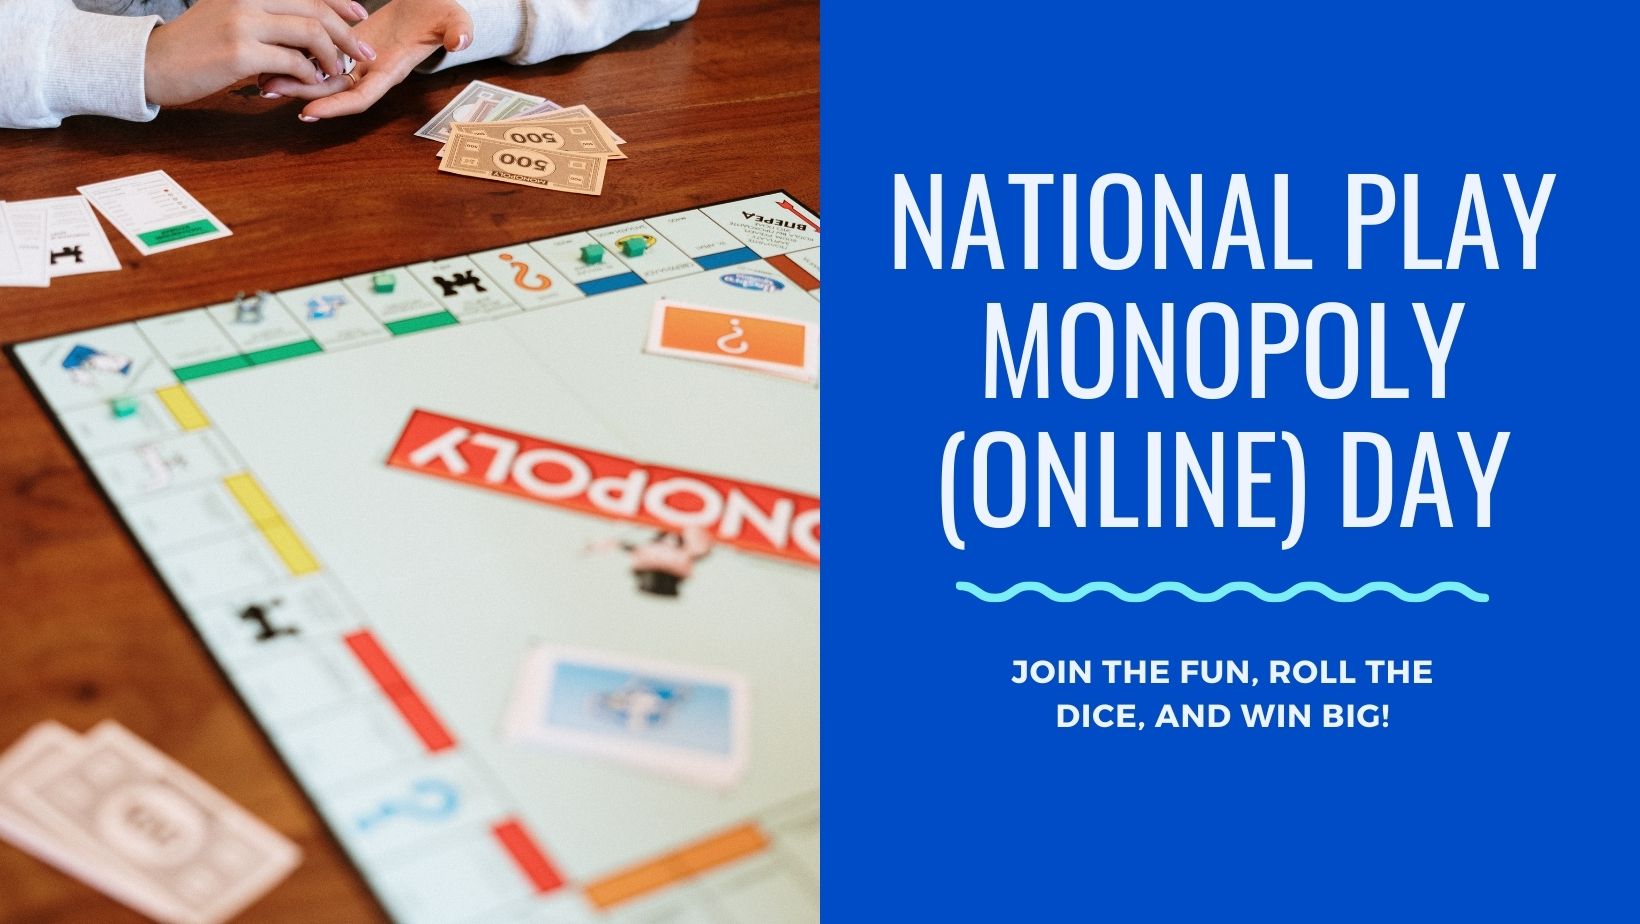 Who Knew?  National Monopoly (Online) Day